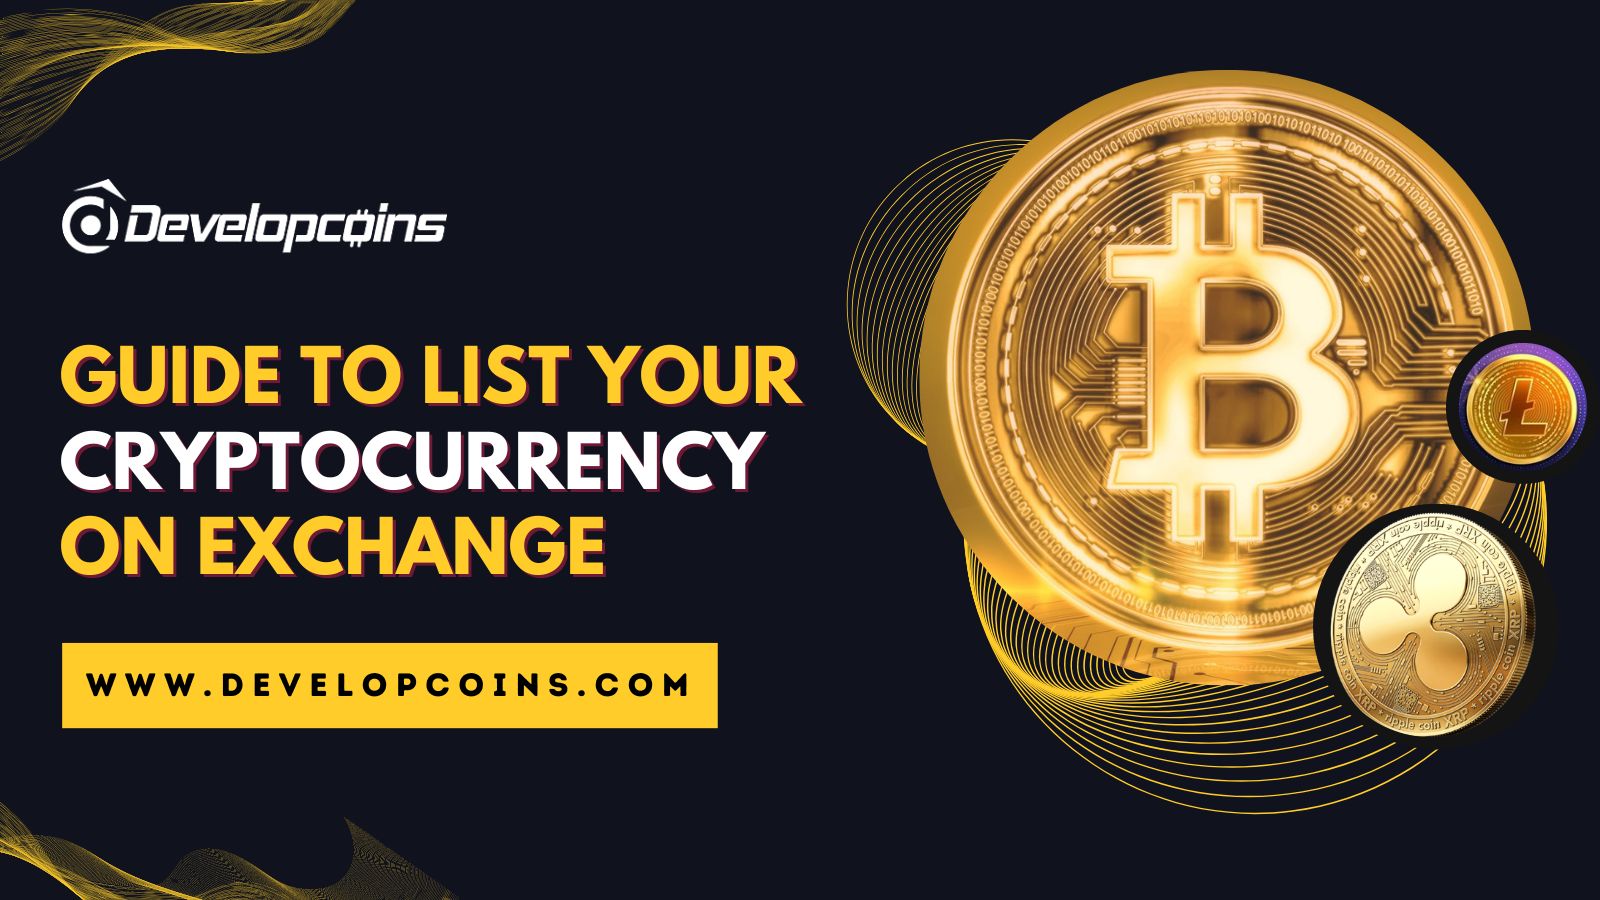 How To List Your Own Coin Or Token On Crypto Exchange? - A Complete Guide